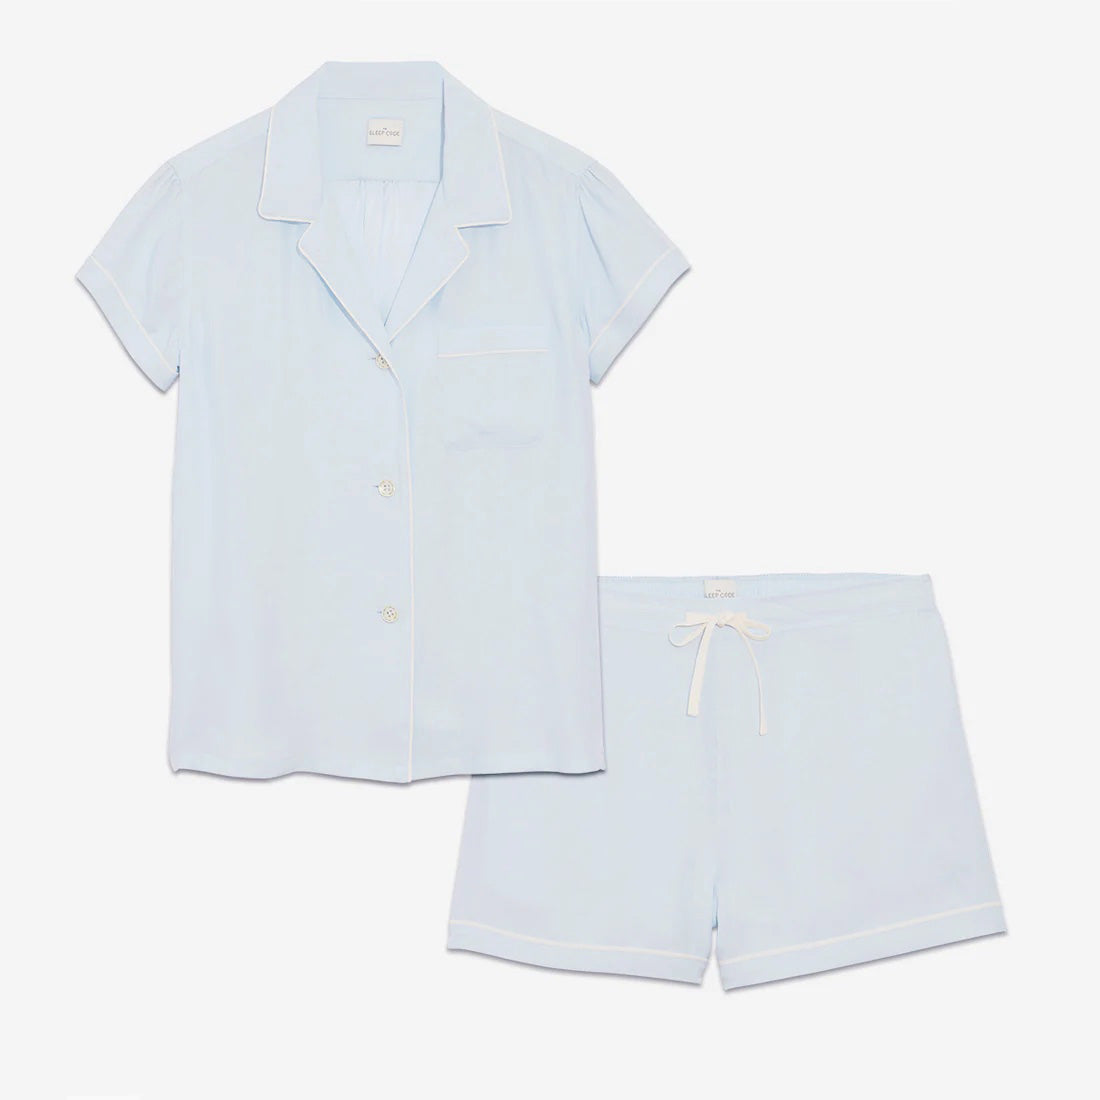 Our short sleeve pajama set features a relaxed fit, providing you with a comfortable and stylish option for warmer weather. The pajama set includes a classic button-up top with a collar, while the matching shorts feature a comfortable elastic waistband, drawstring, and side-seam pockets.